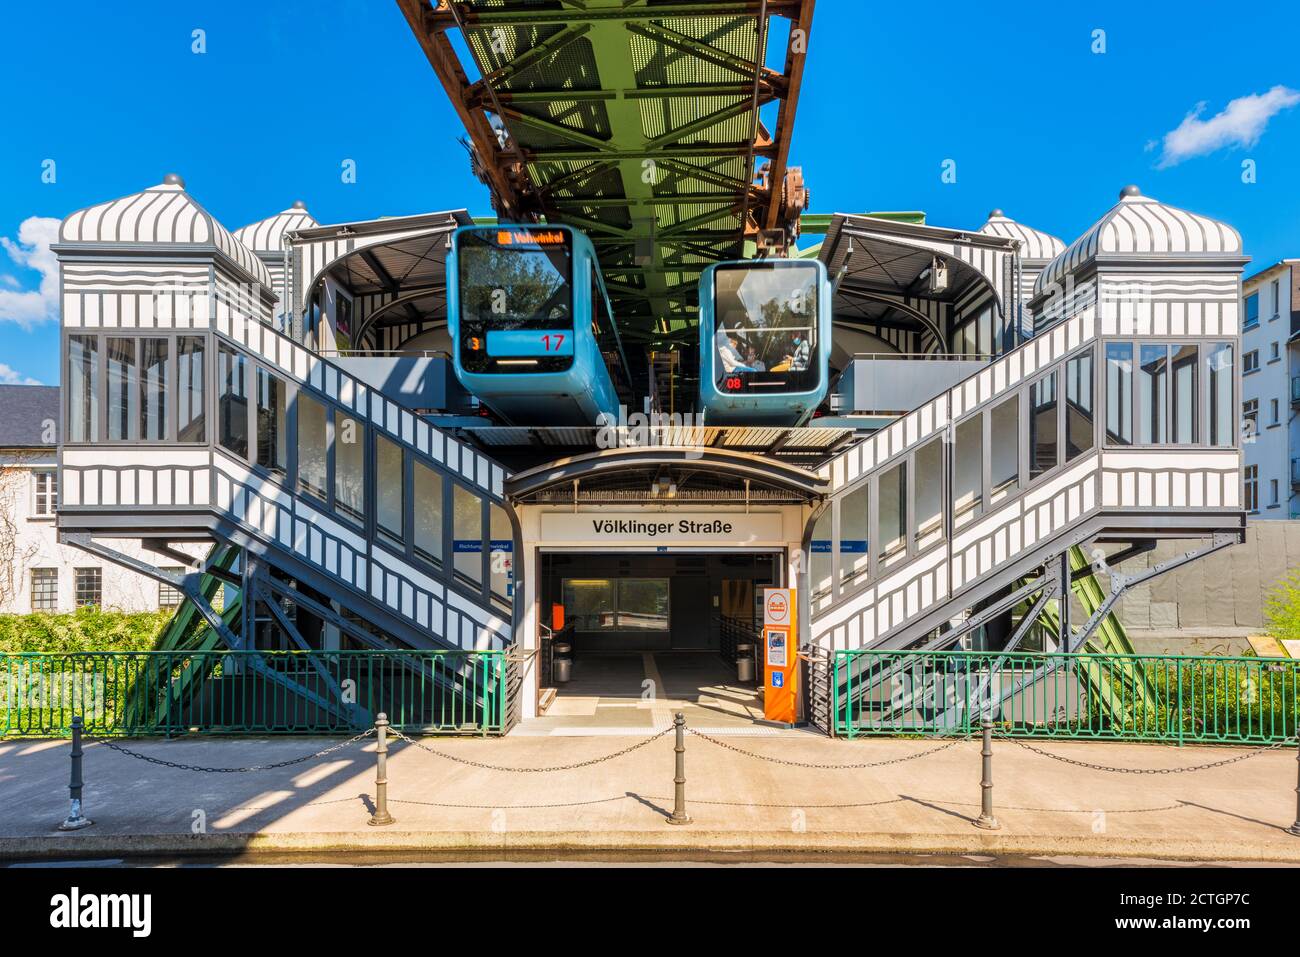 Trains come and go at Völklinger Strasse, one of 20 Schwebebahn Railroad Stations in Wuppertal, Germany Stock Photo